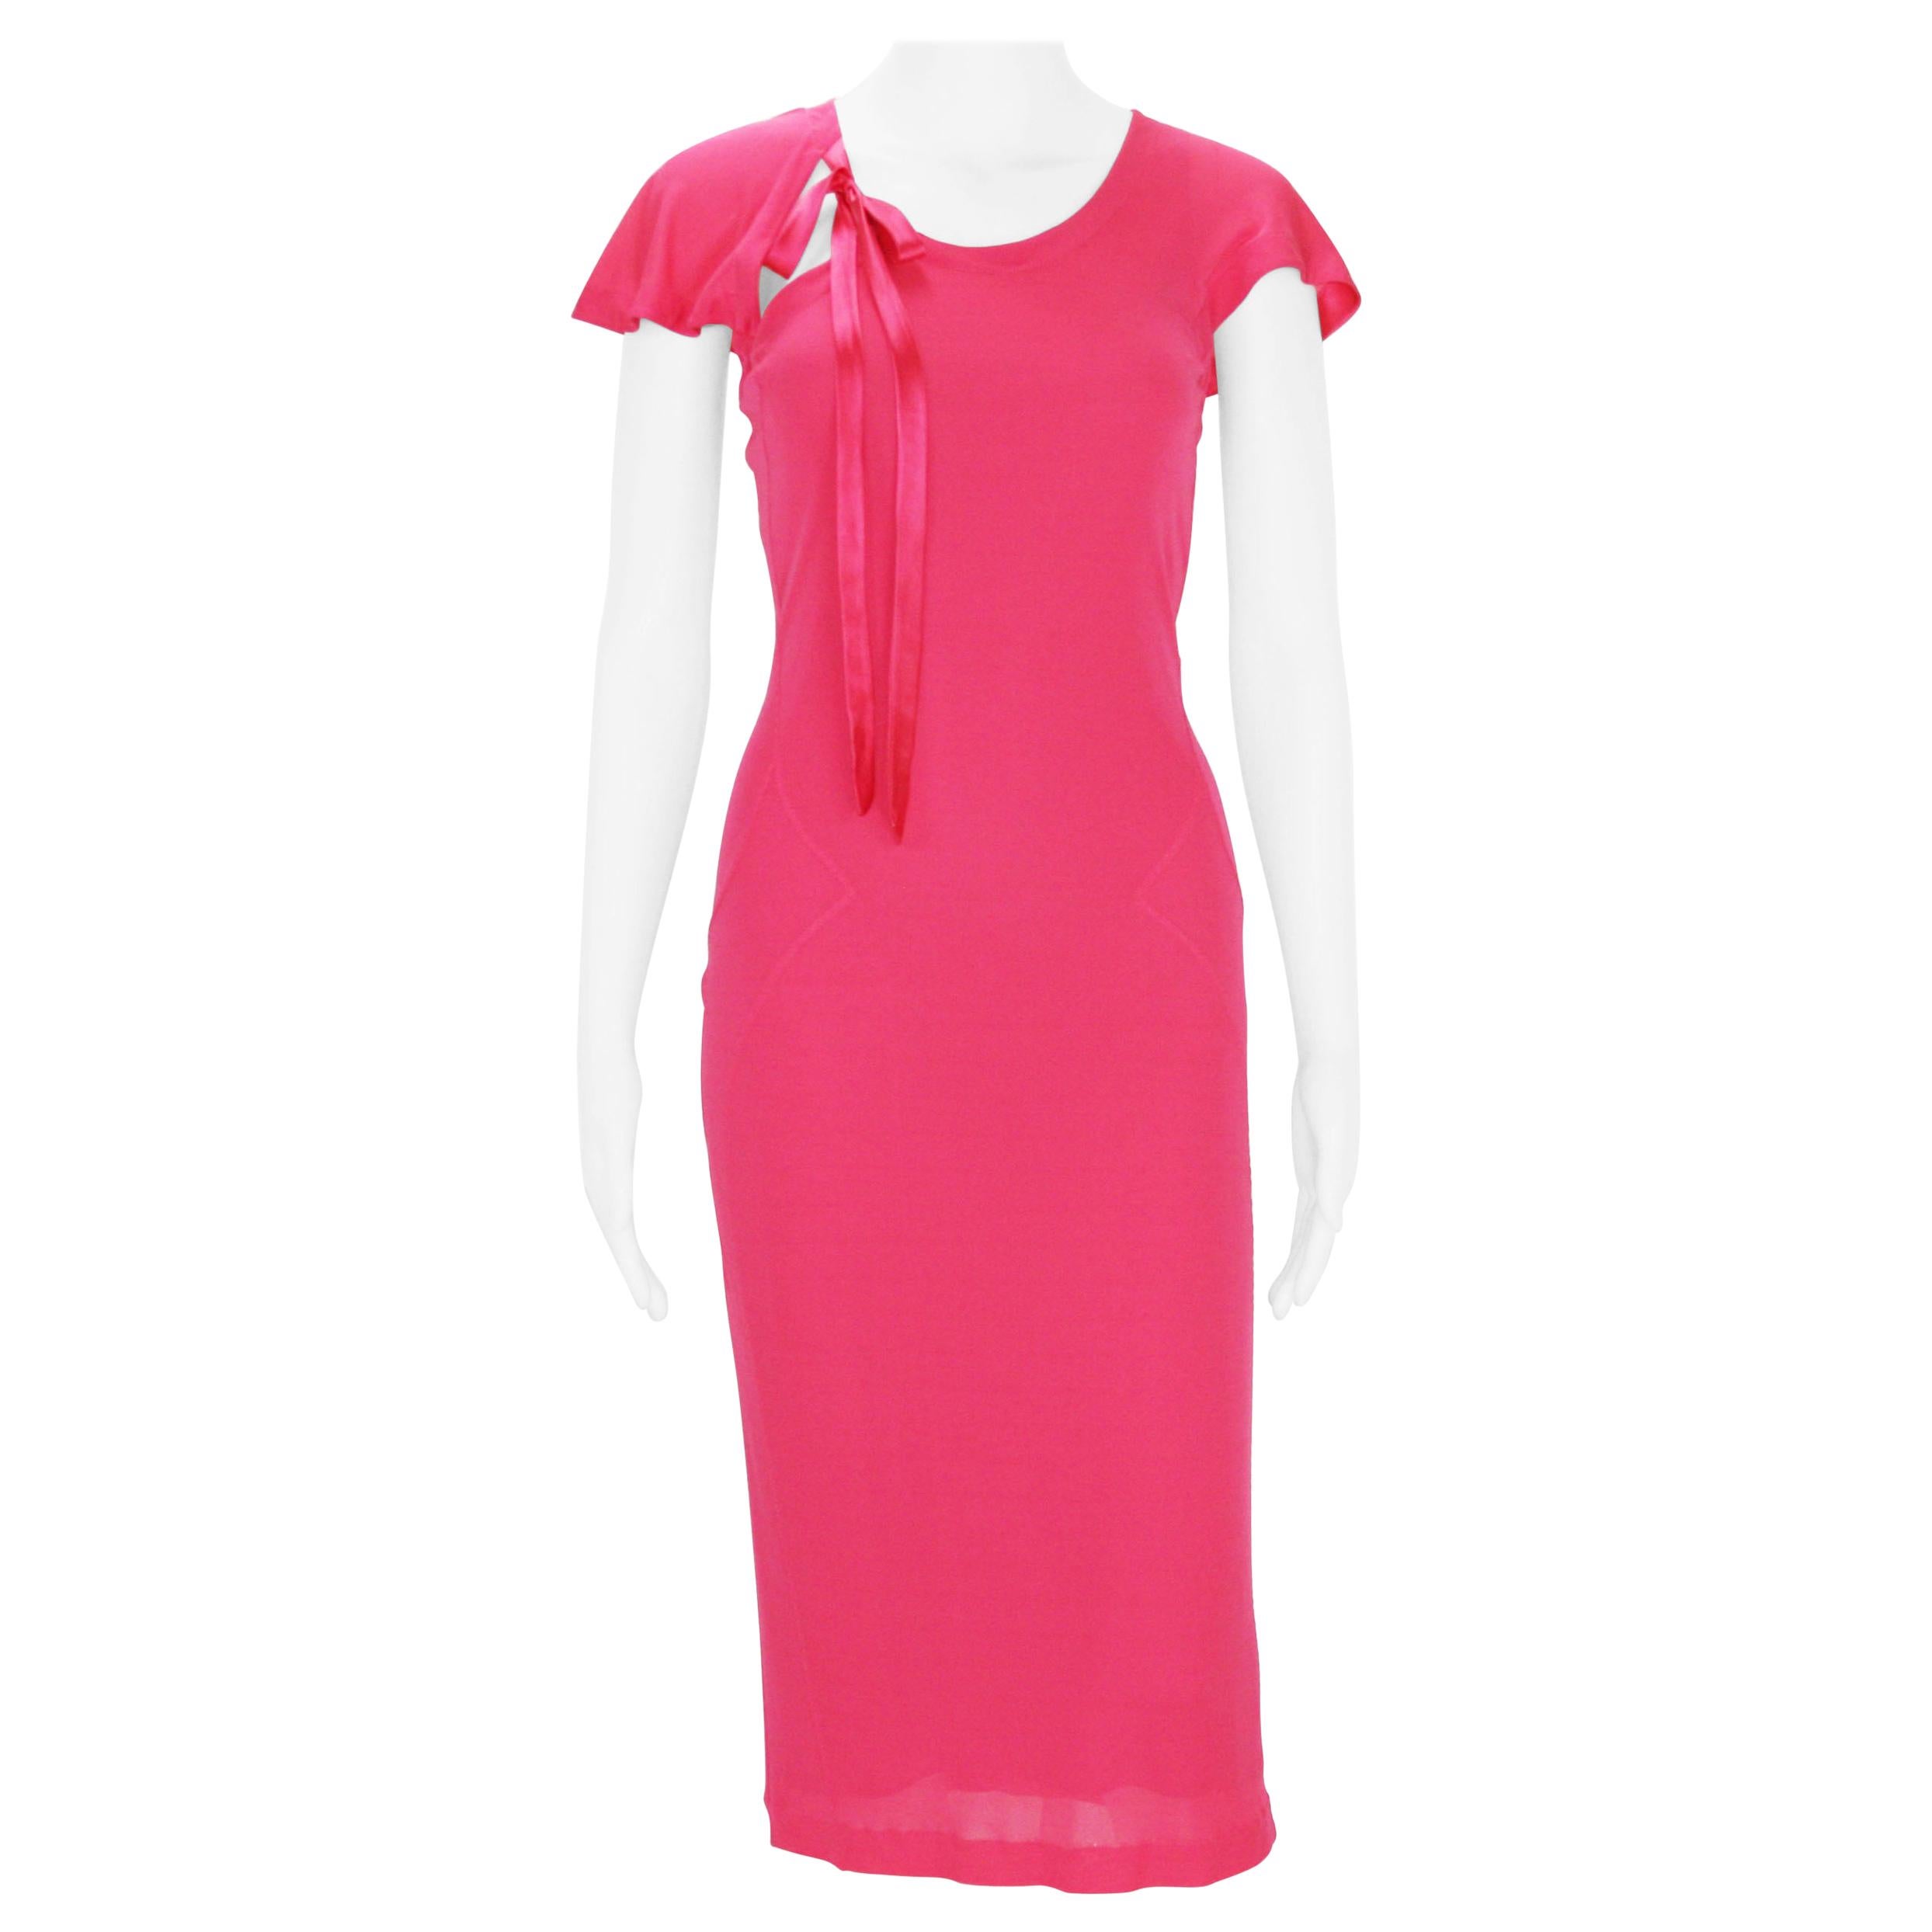 Tom Ford for Yves Saint Laurent F/W 2004 Collection Pink Jersey Dress size S For Sale